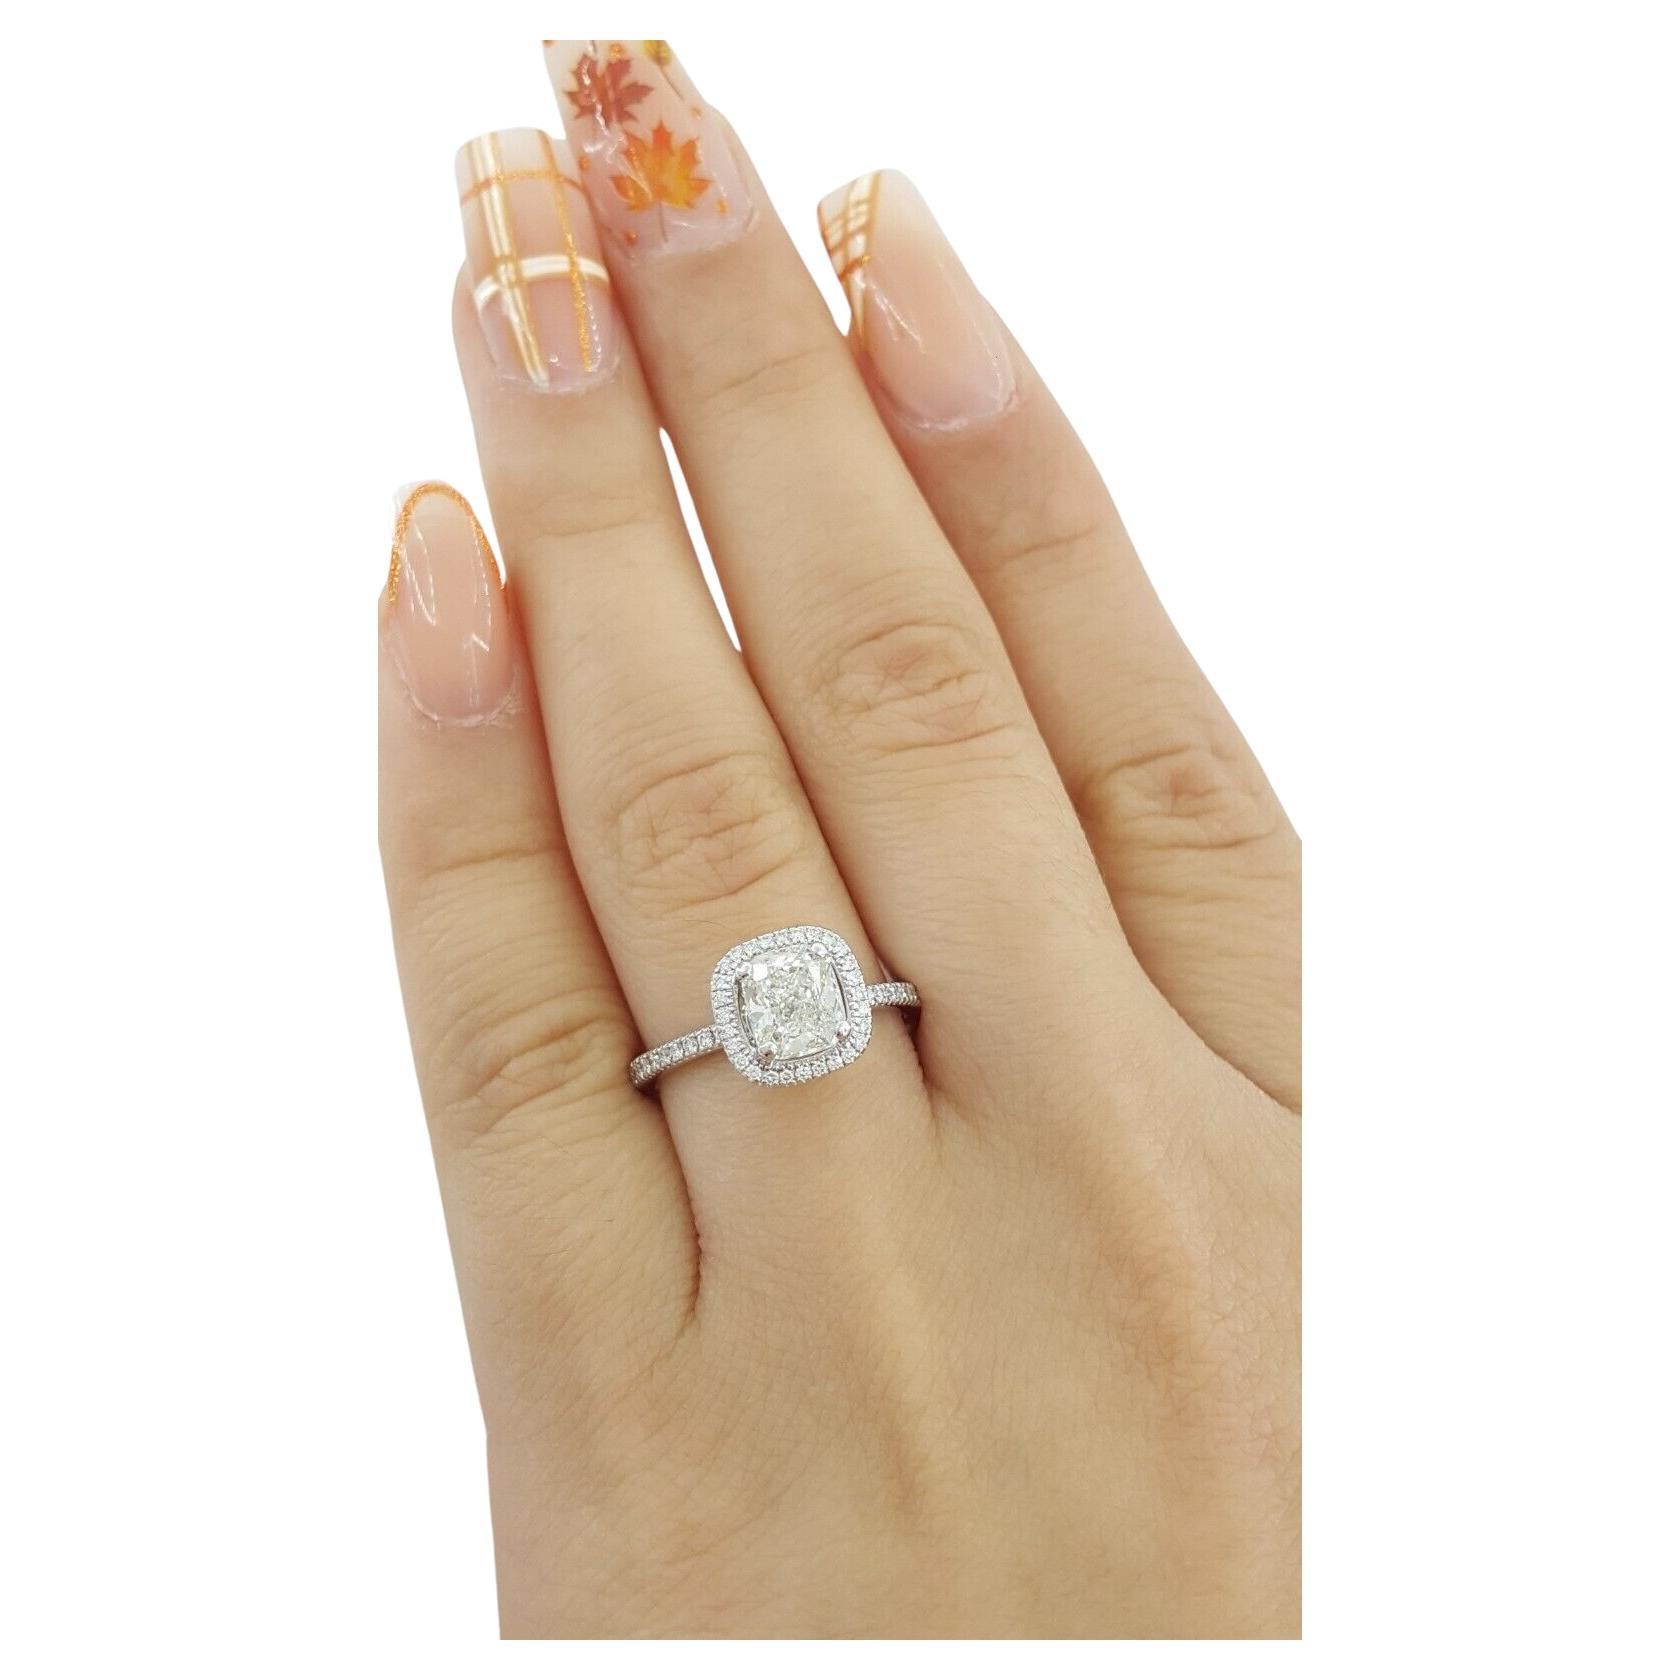 The engagement ring features a 1.3 carat total weight Cushion Brilliant Cut diamond surrounded by a halo, set in 14k White Gold. The ring is sized 5.25 and weighs 2.8 grams. The center stone is a Natural Cushion Brilliant Cut diamond, weighing 0.97